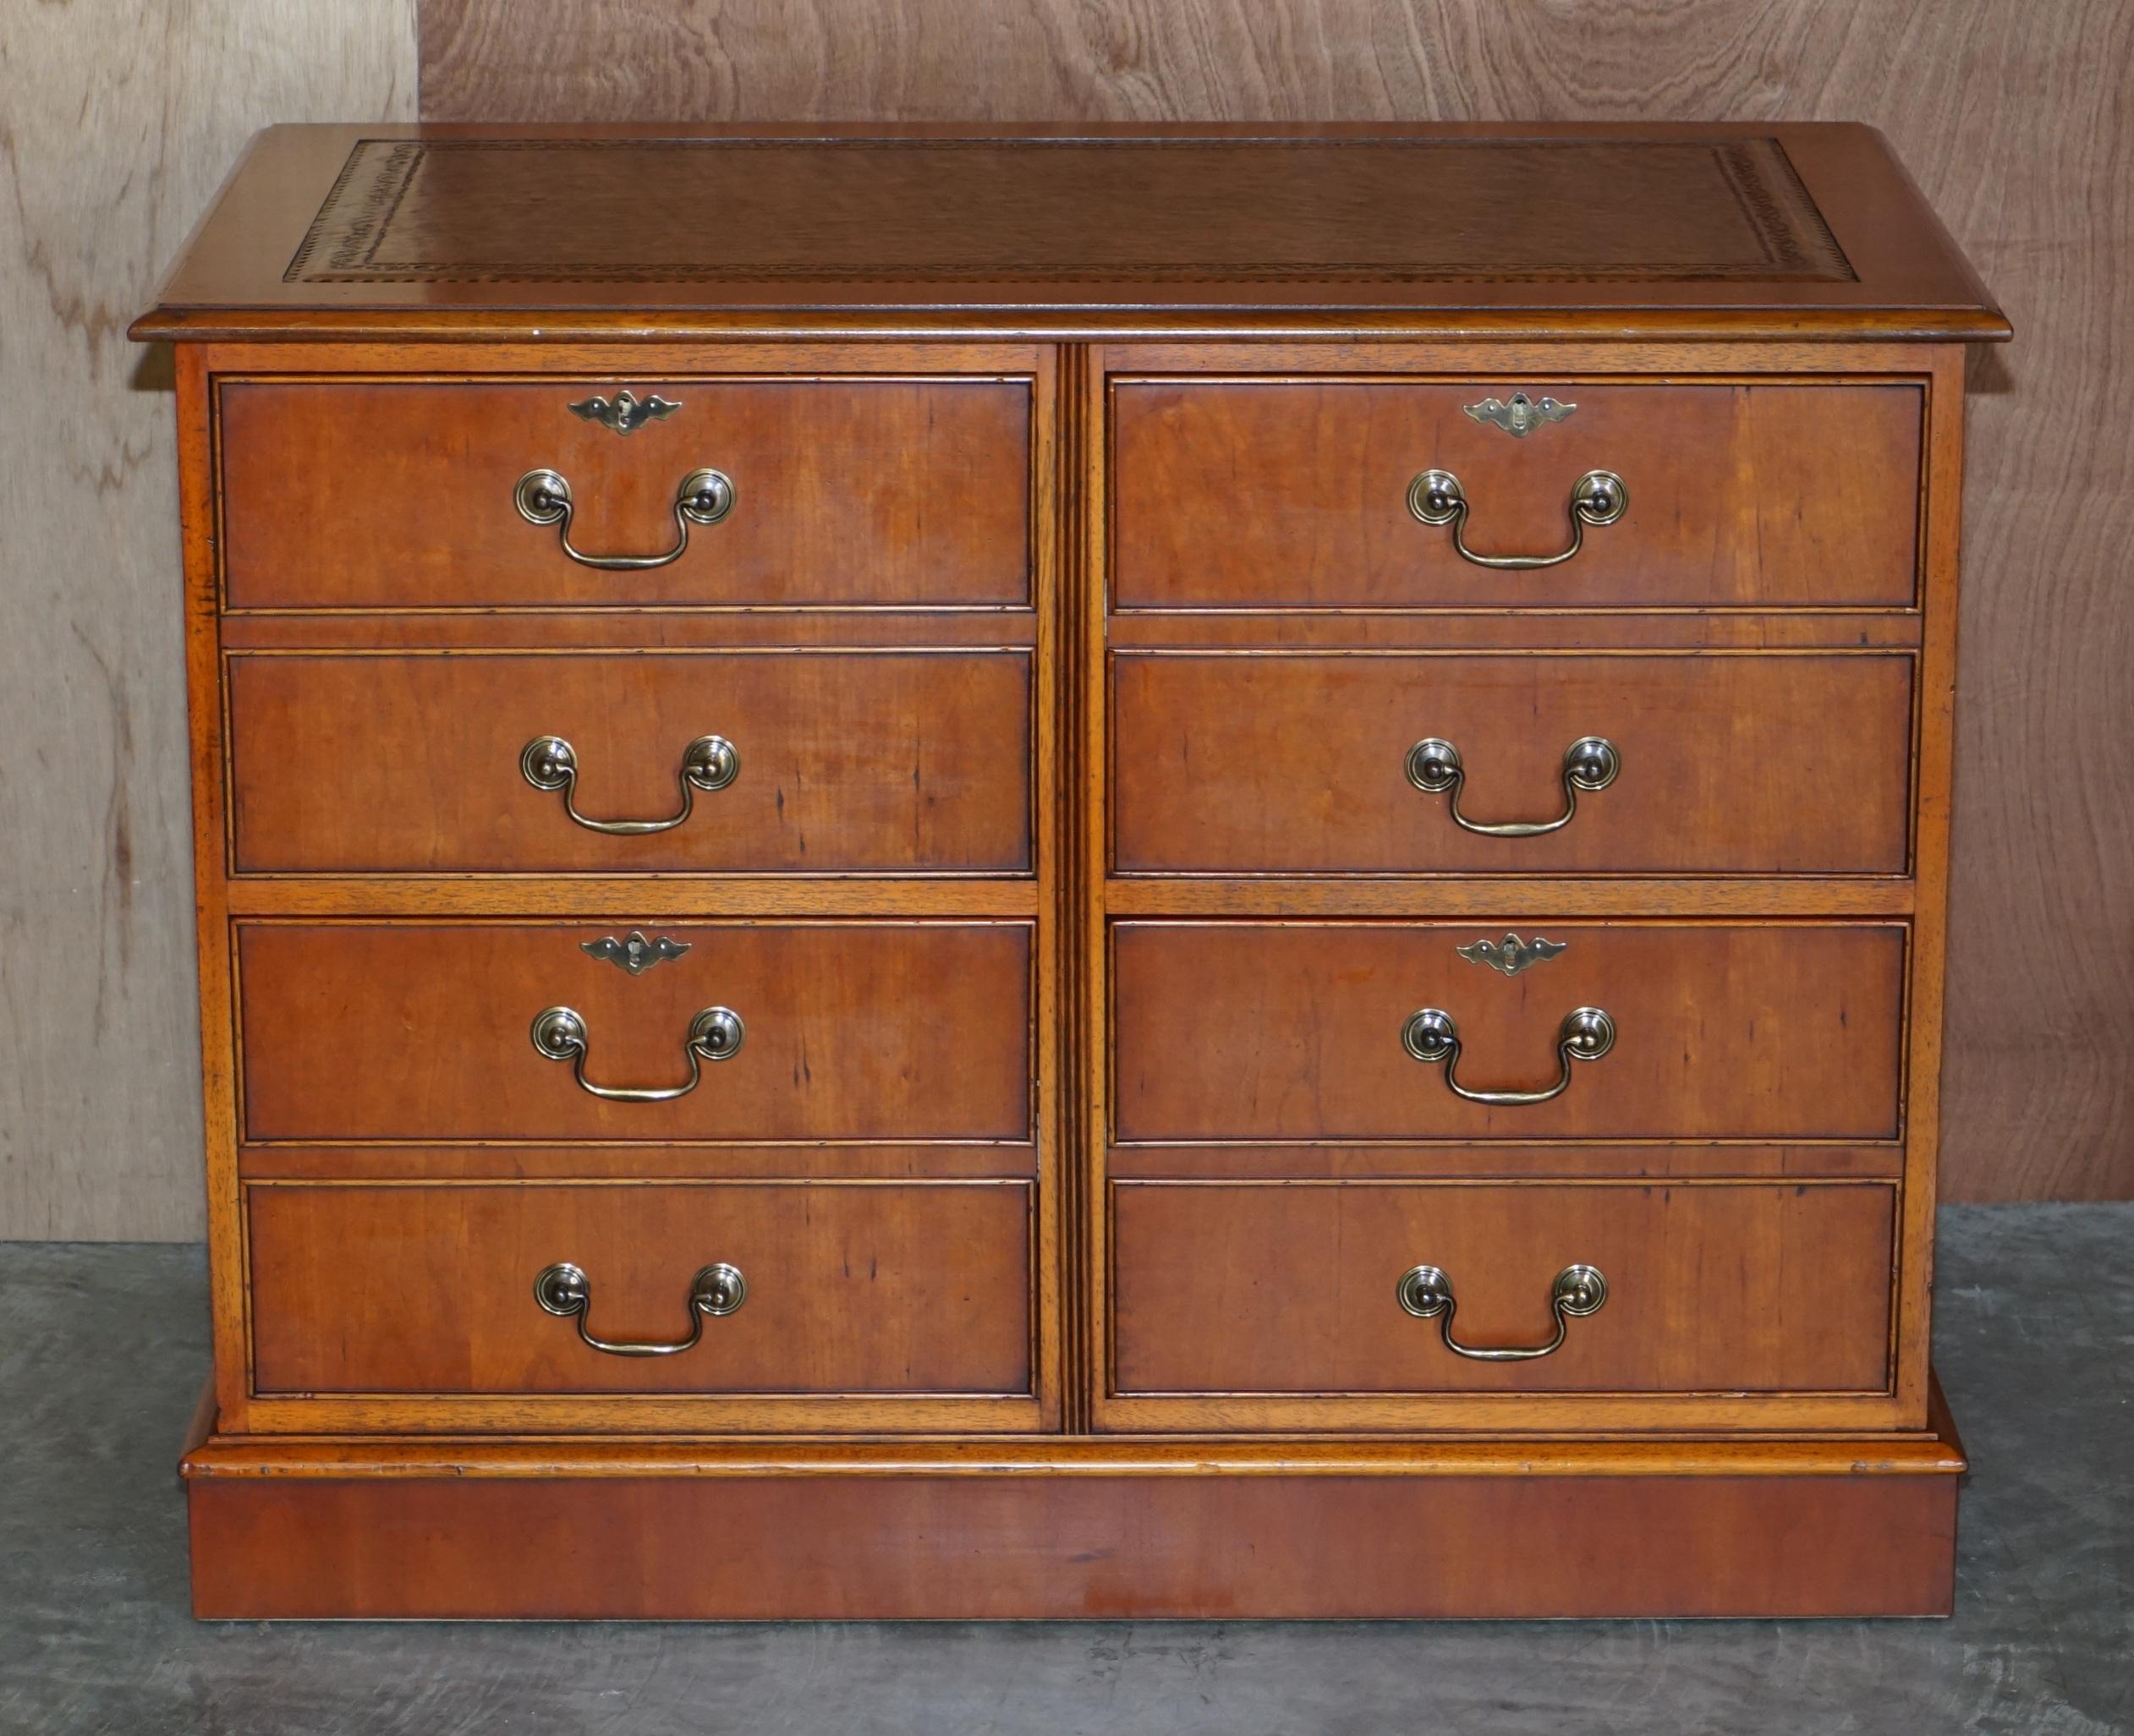 We are delighted to offer this exquisite quad drawer yew wood brown leather topped double bank filing cabinet

A good looking and well made piece, ideally suited for an office or library setting but can of course be used for a living room pedestal